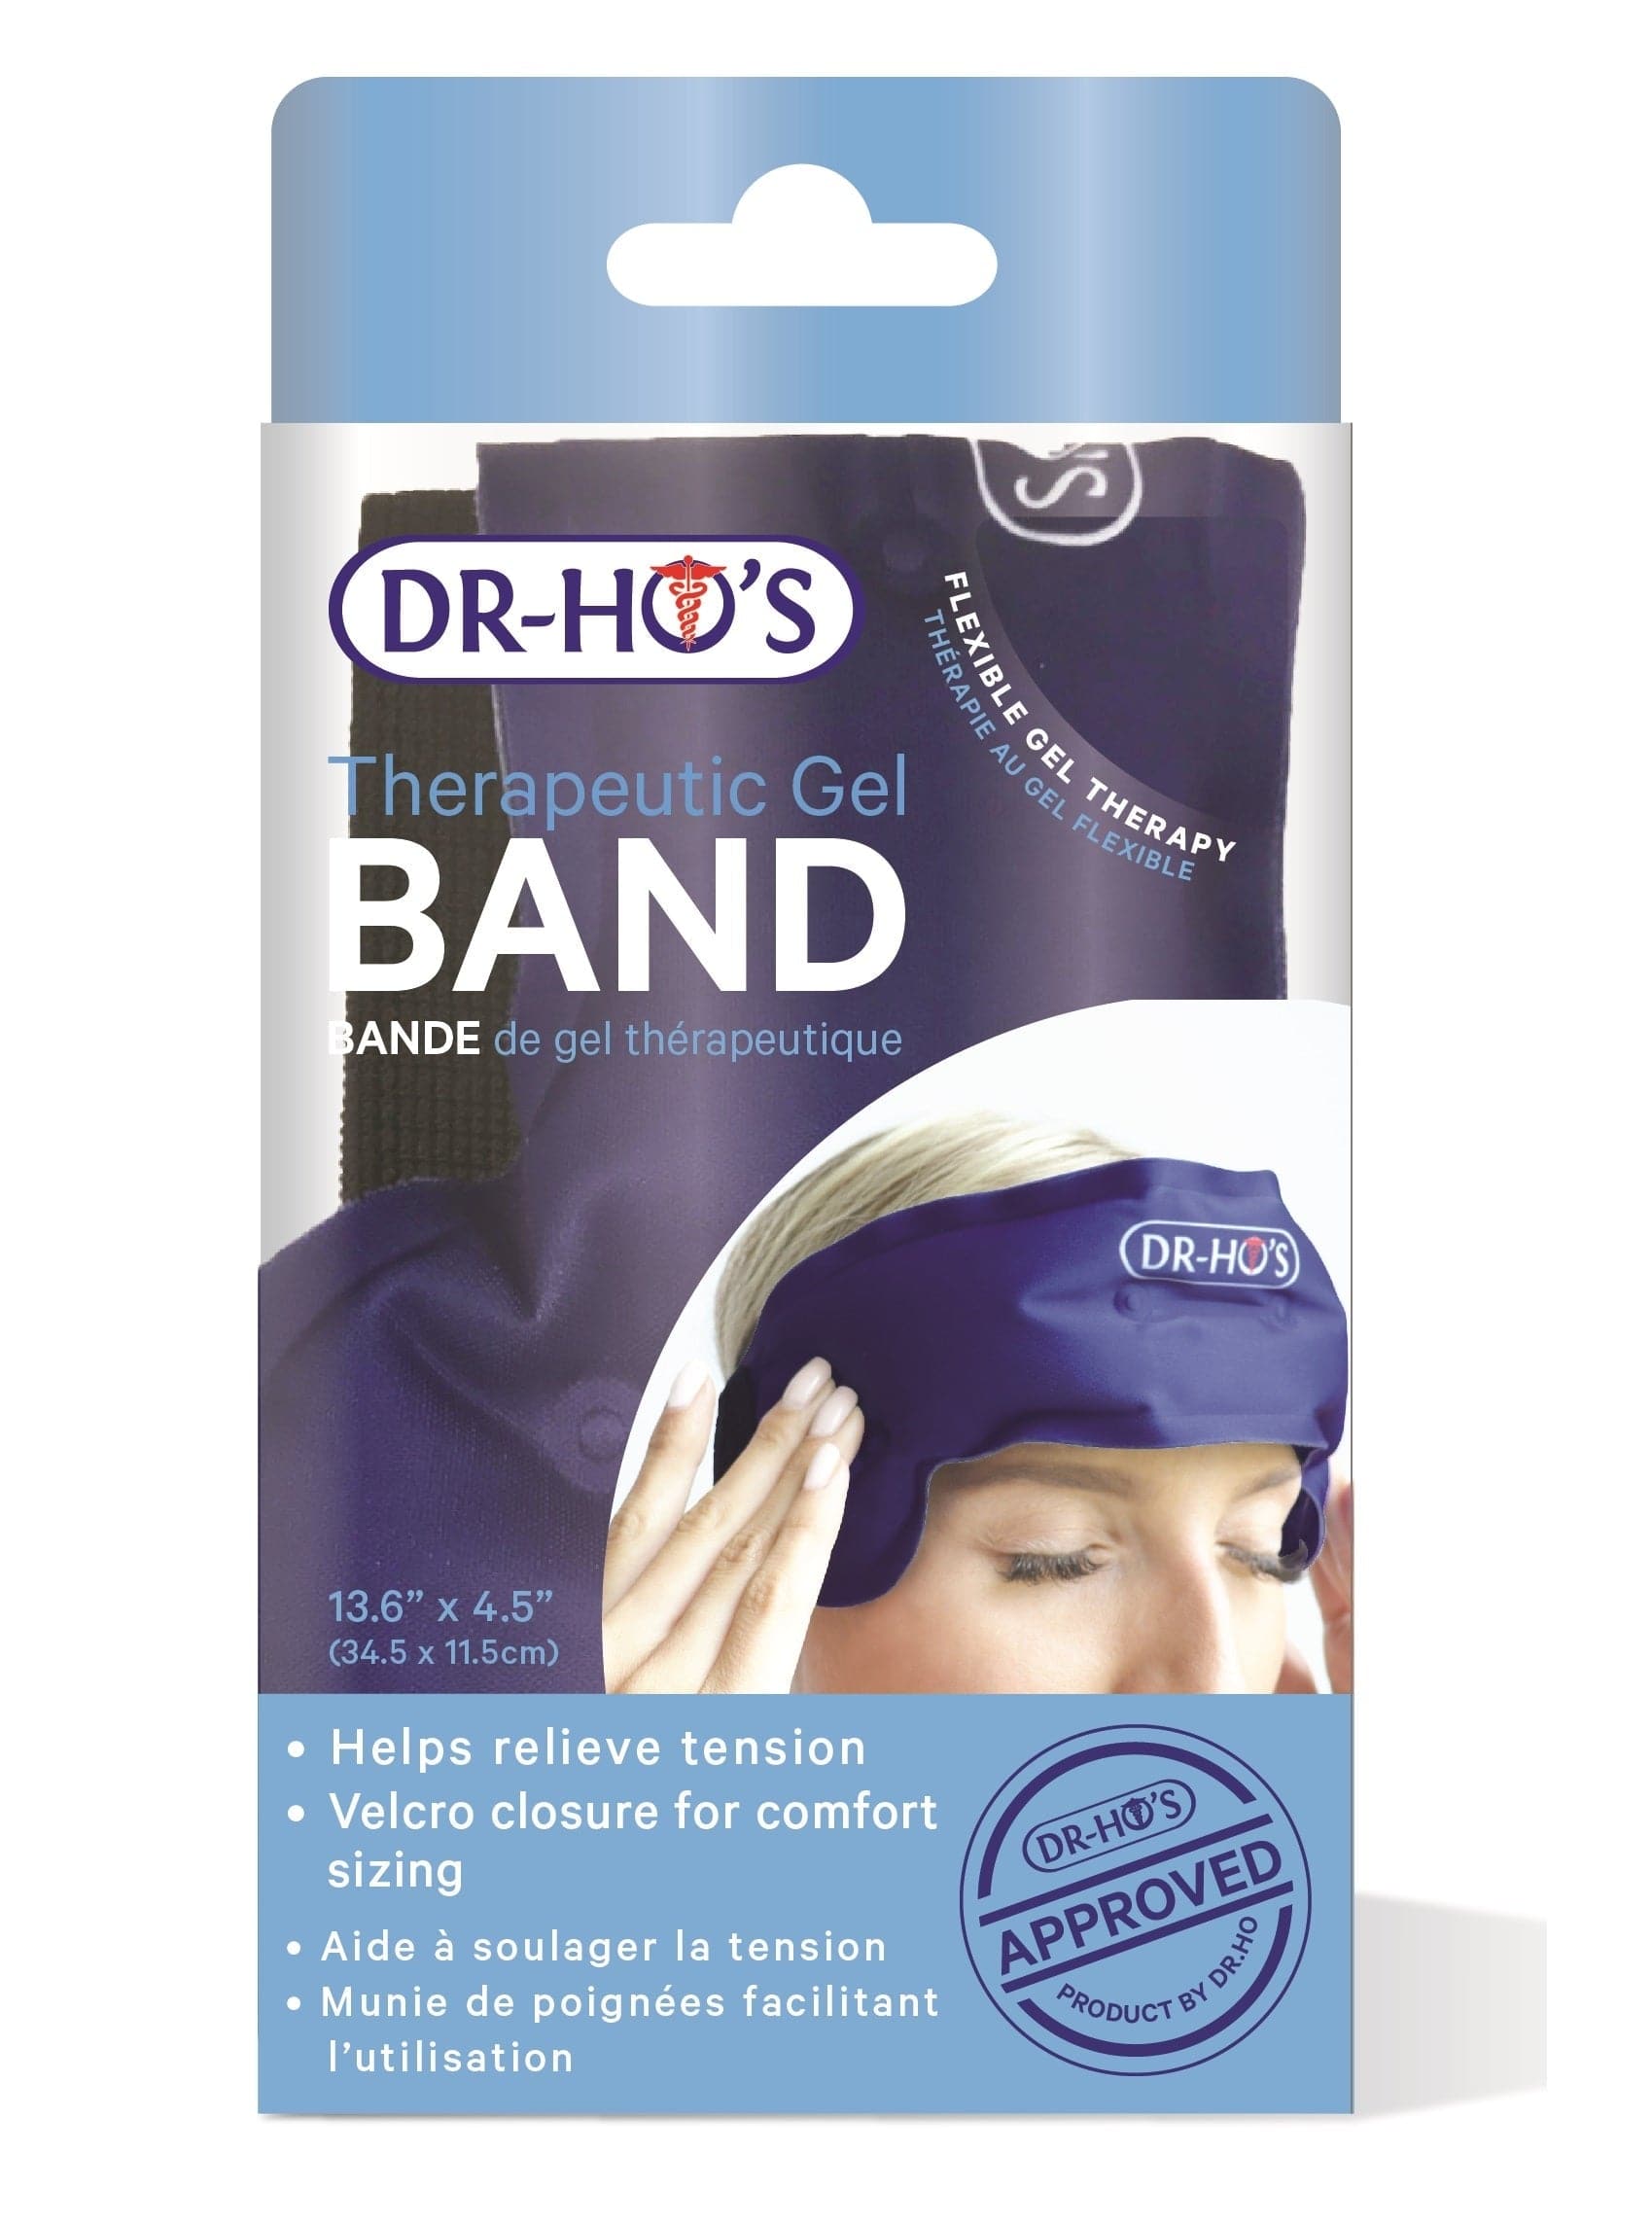 DR-HO'S Therapeutic Gel Band